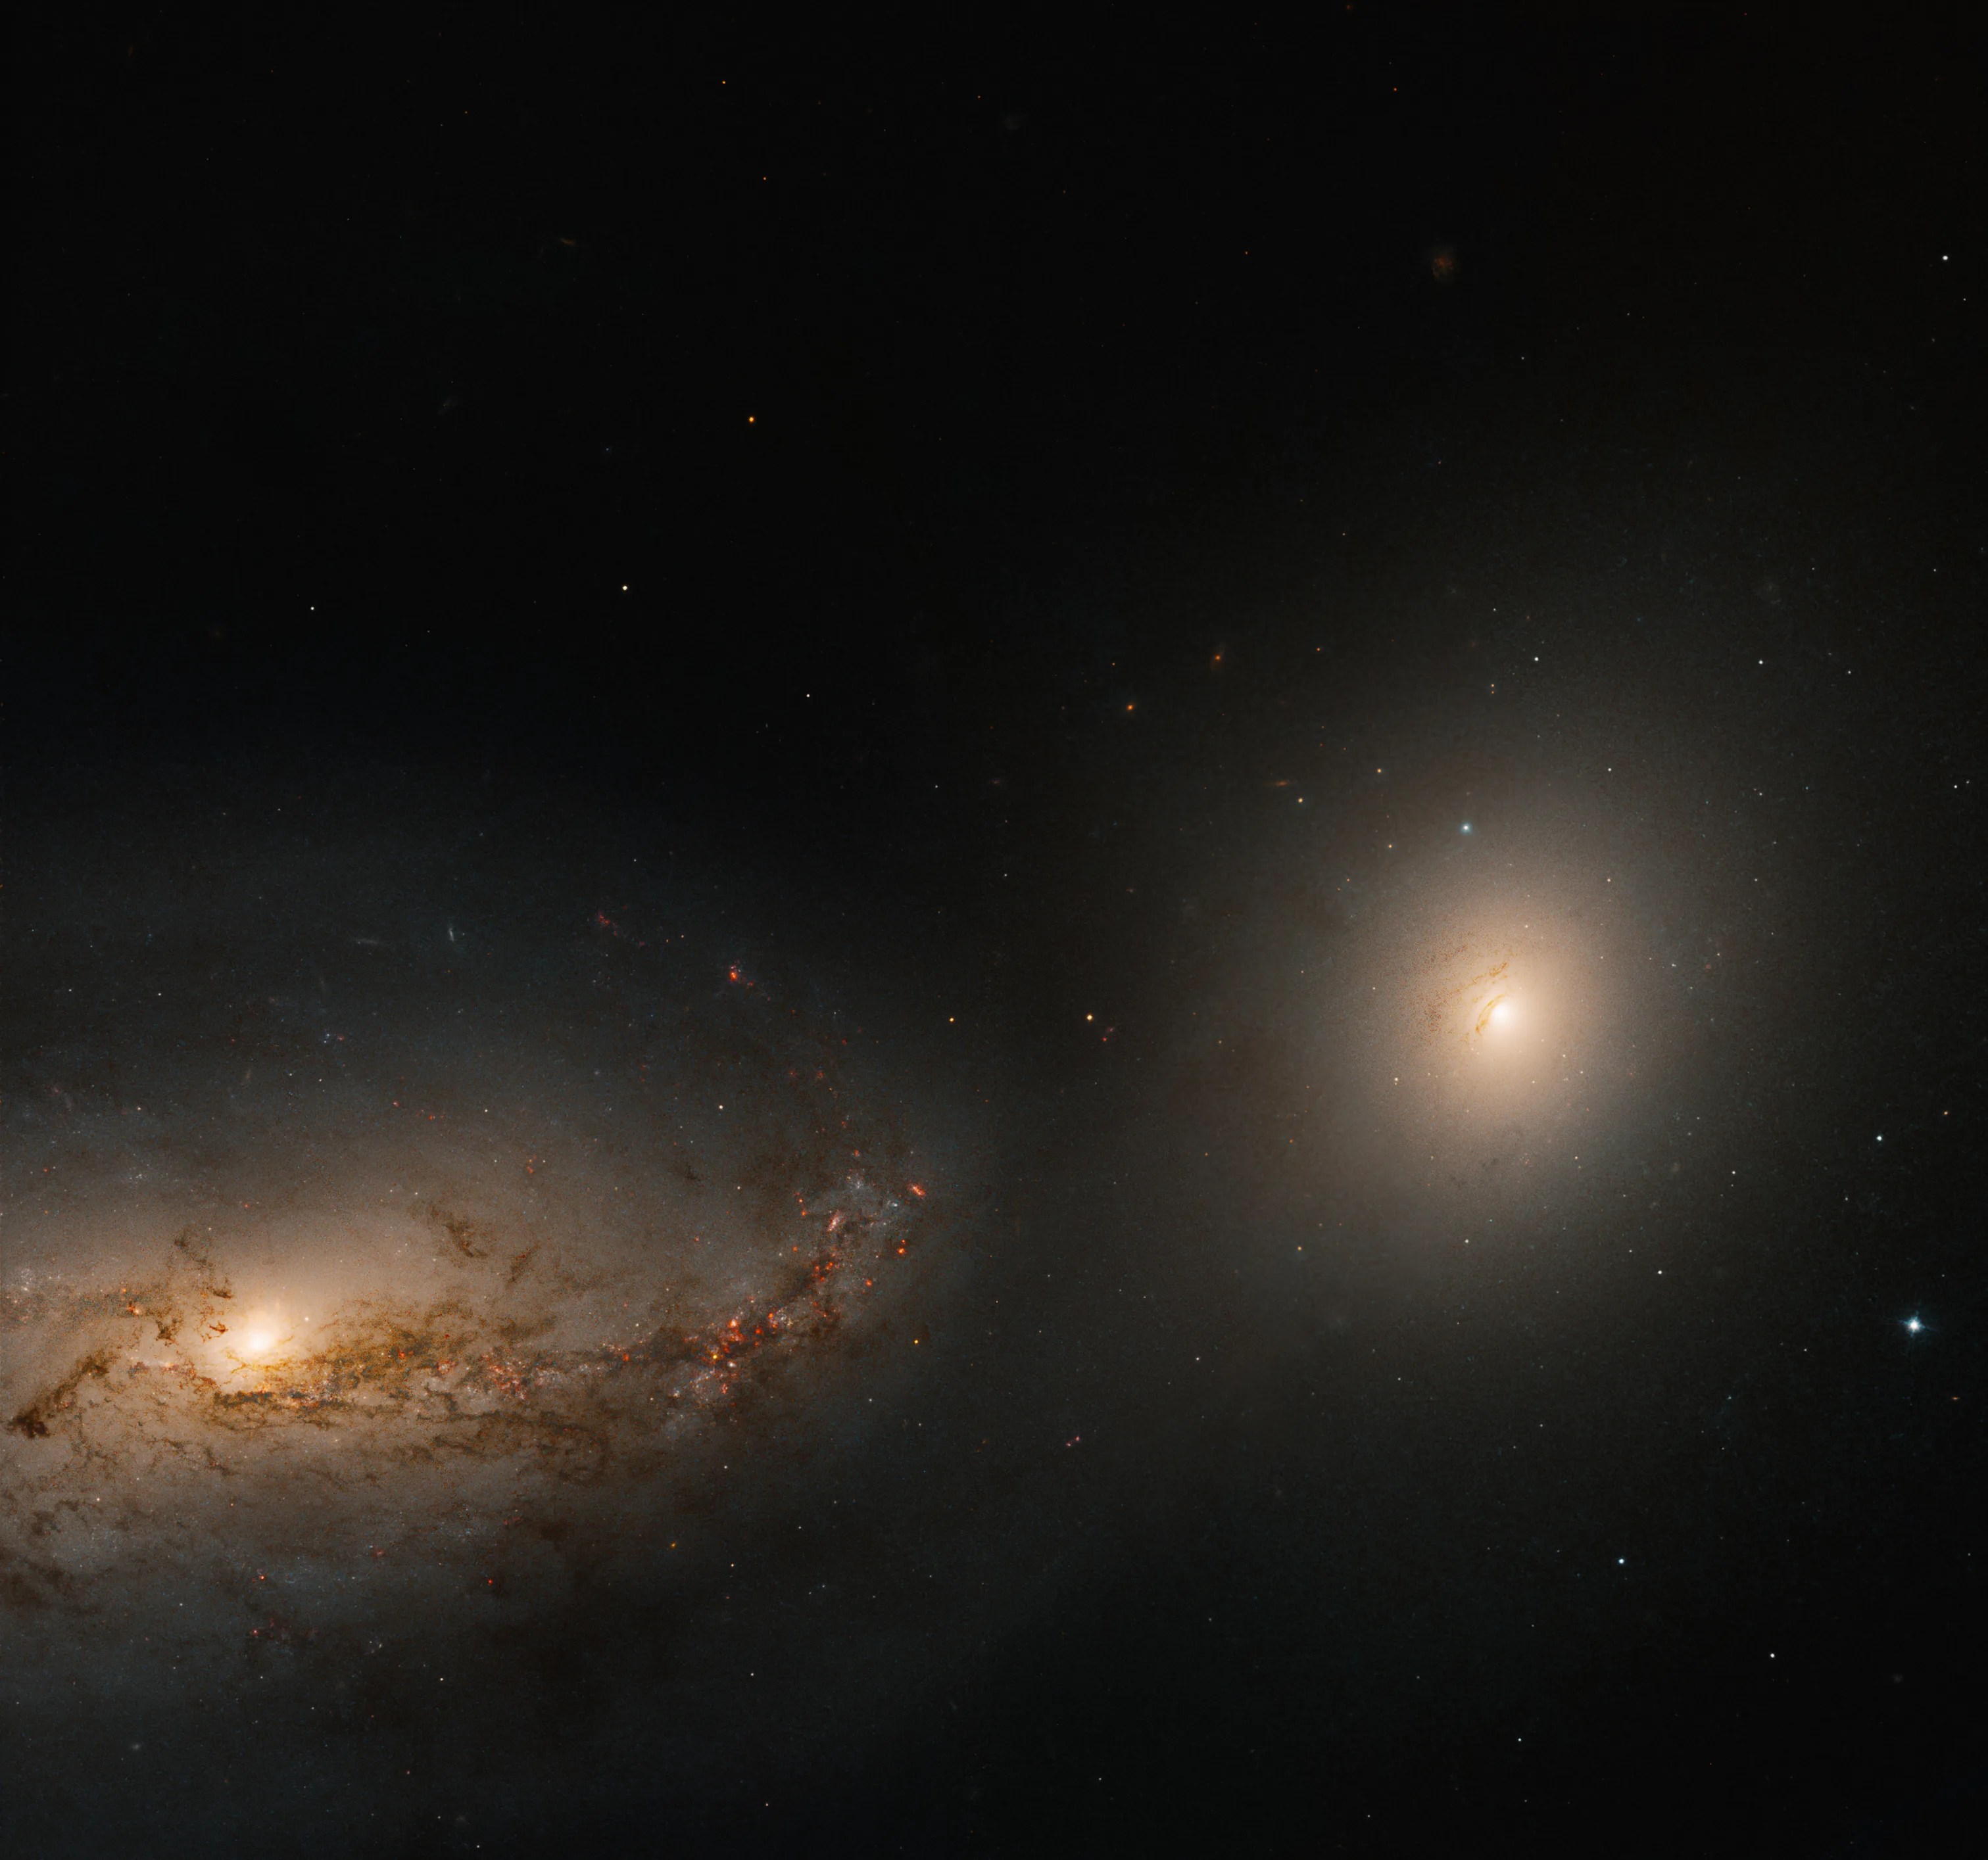 Lower left: large spiral galaxy with reddish brown dust lanes extends toward the center of the image. center right: bright elliptical galaxy